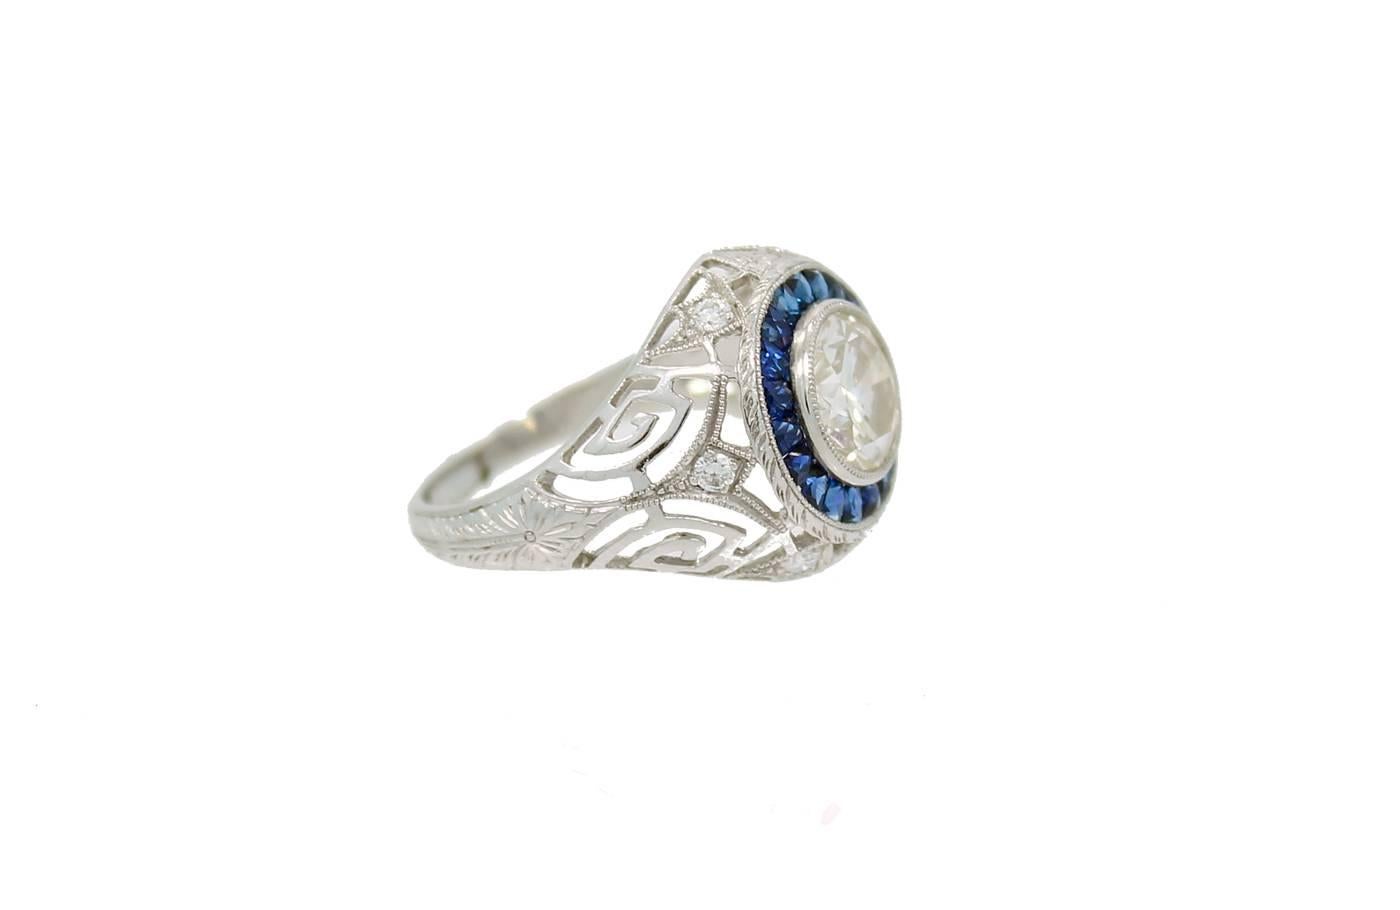 Platinum Ring with 20 French Cut Blue Sapphire's weighing a total of .71 carat's, a Center Round Top Light Brown Diamond weighing 2.05ct and SI in clarity. The Hand Carved Mounting has a total of 6 diamonds which weigh .14ct in total. Very